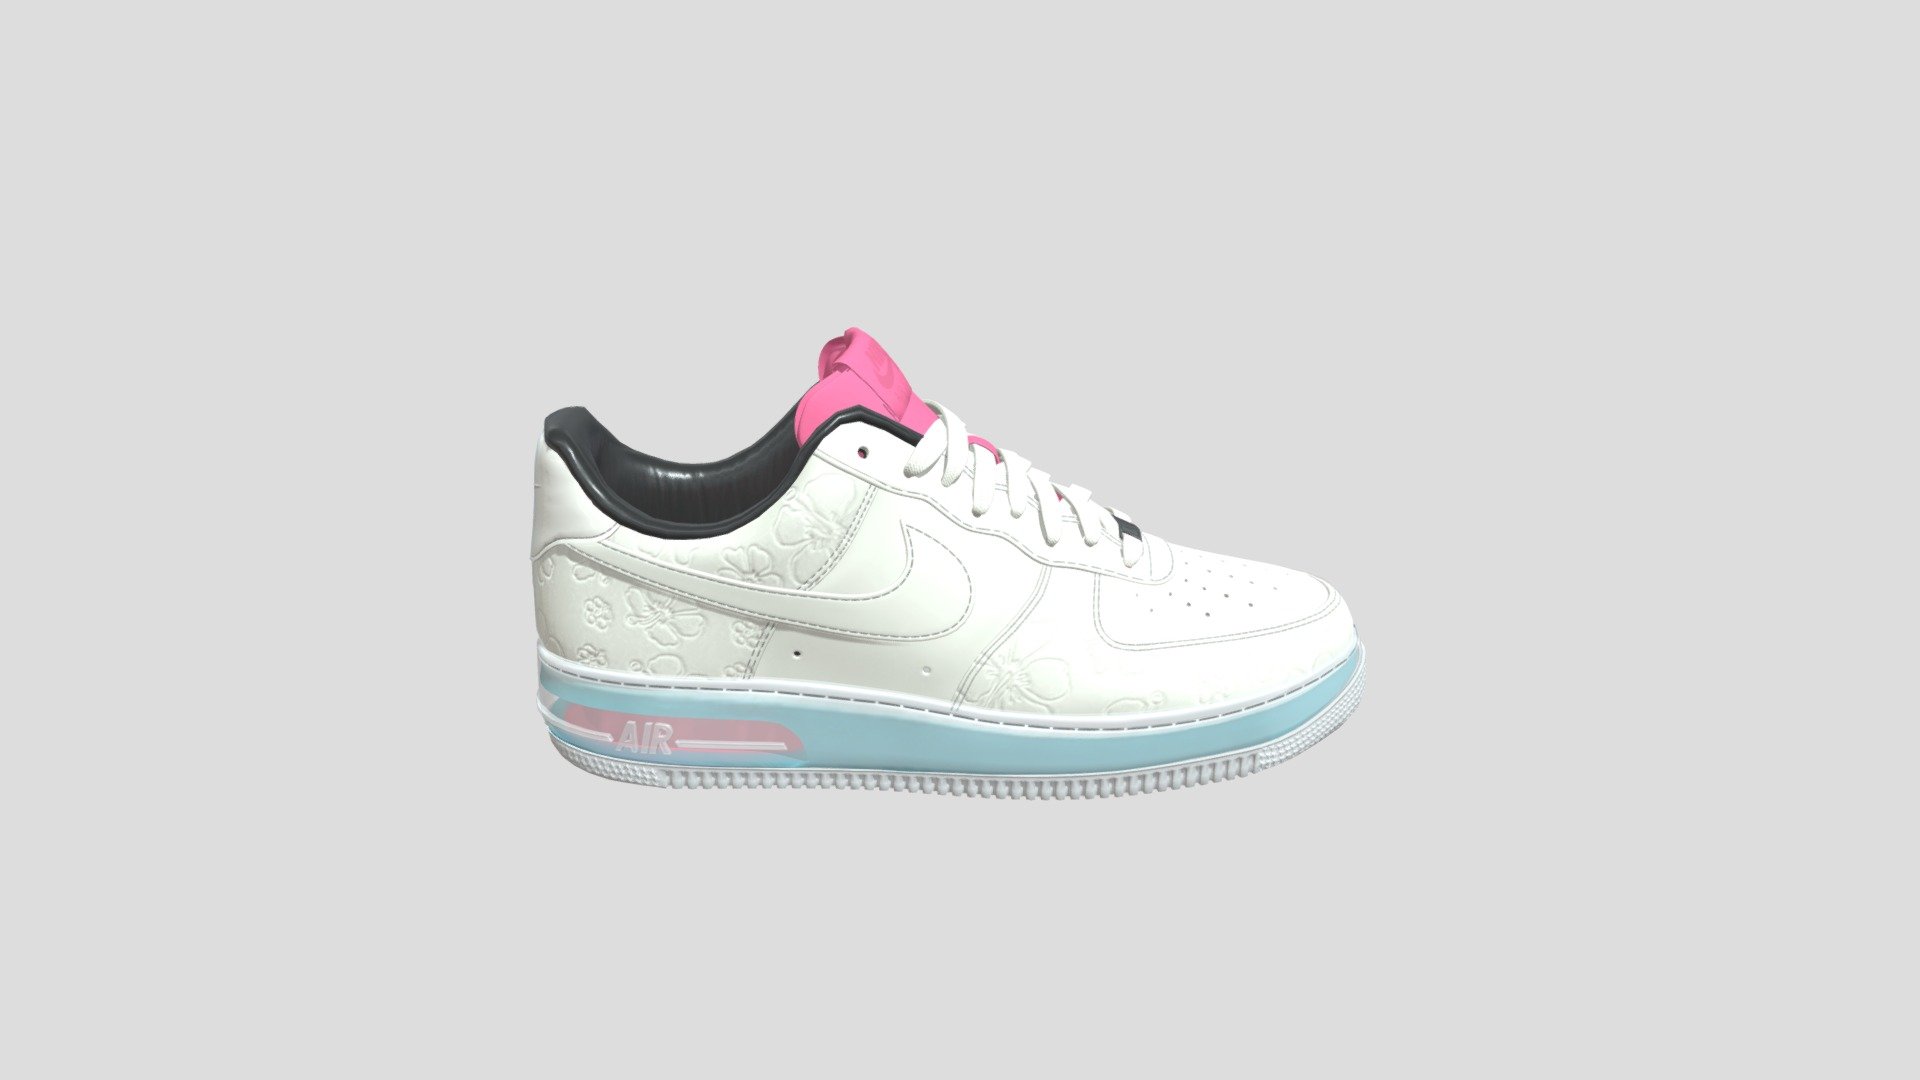 dot swoosh our force one 1 AF1 nike air sprmx - dot swoosh our force one 1 AF1 nike air sprmx - 3D model by awax38000 3d model